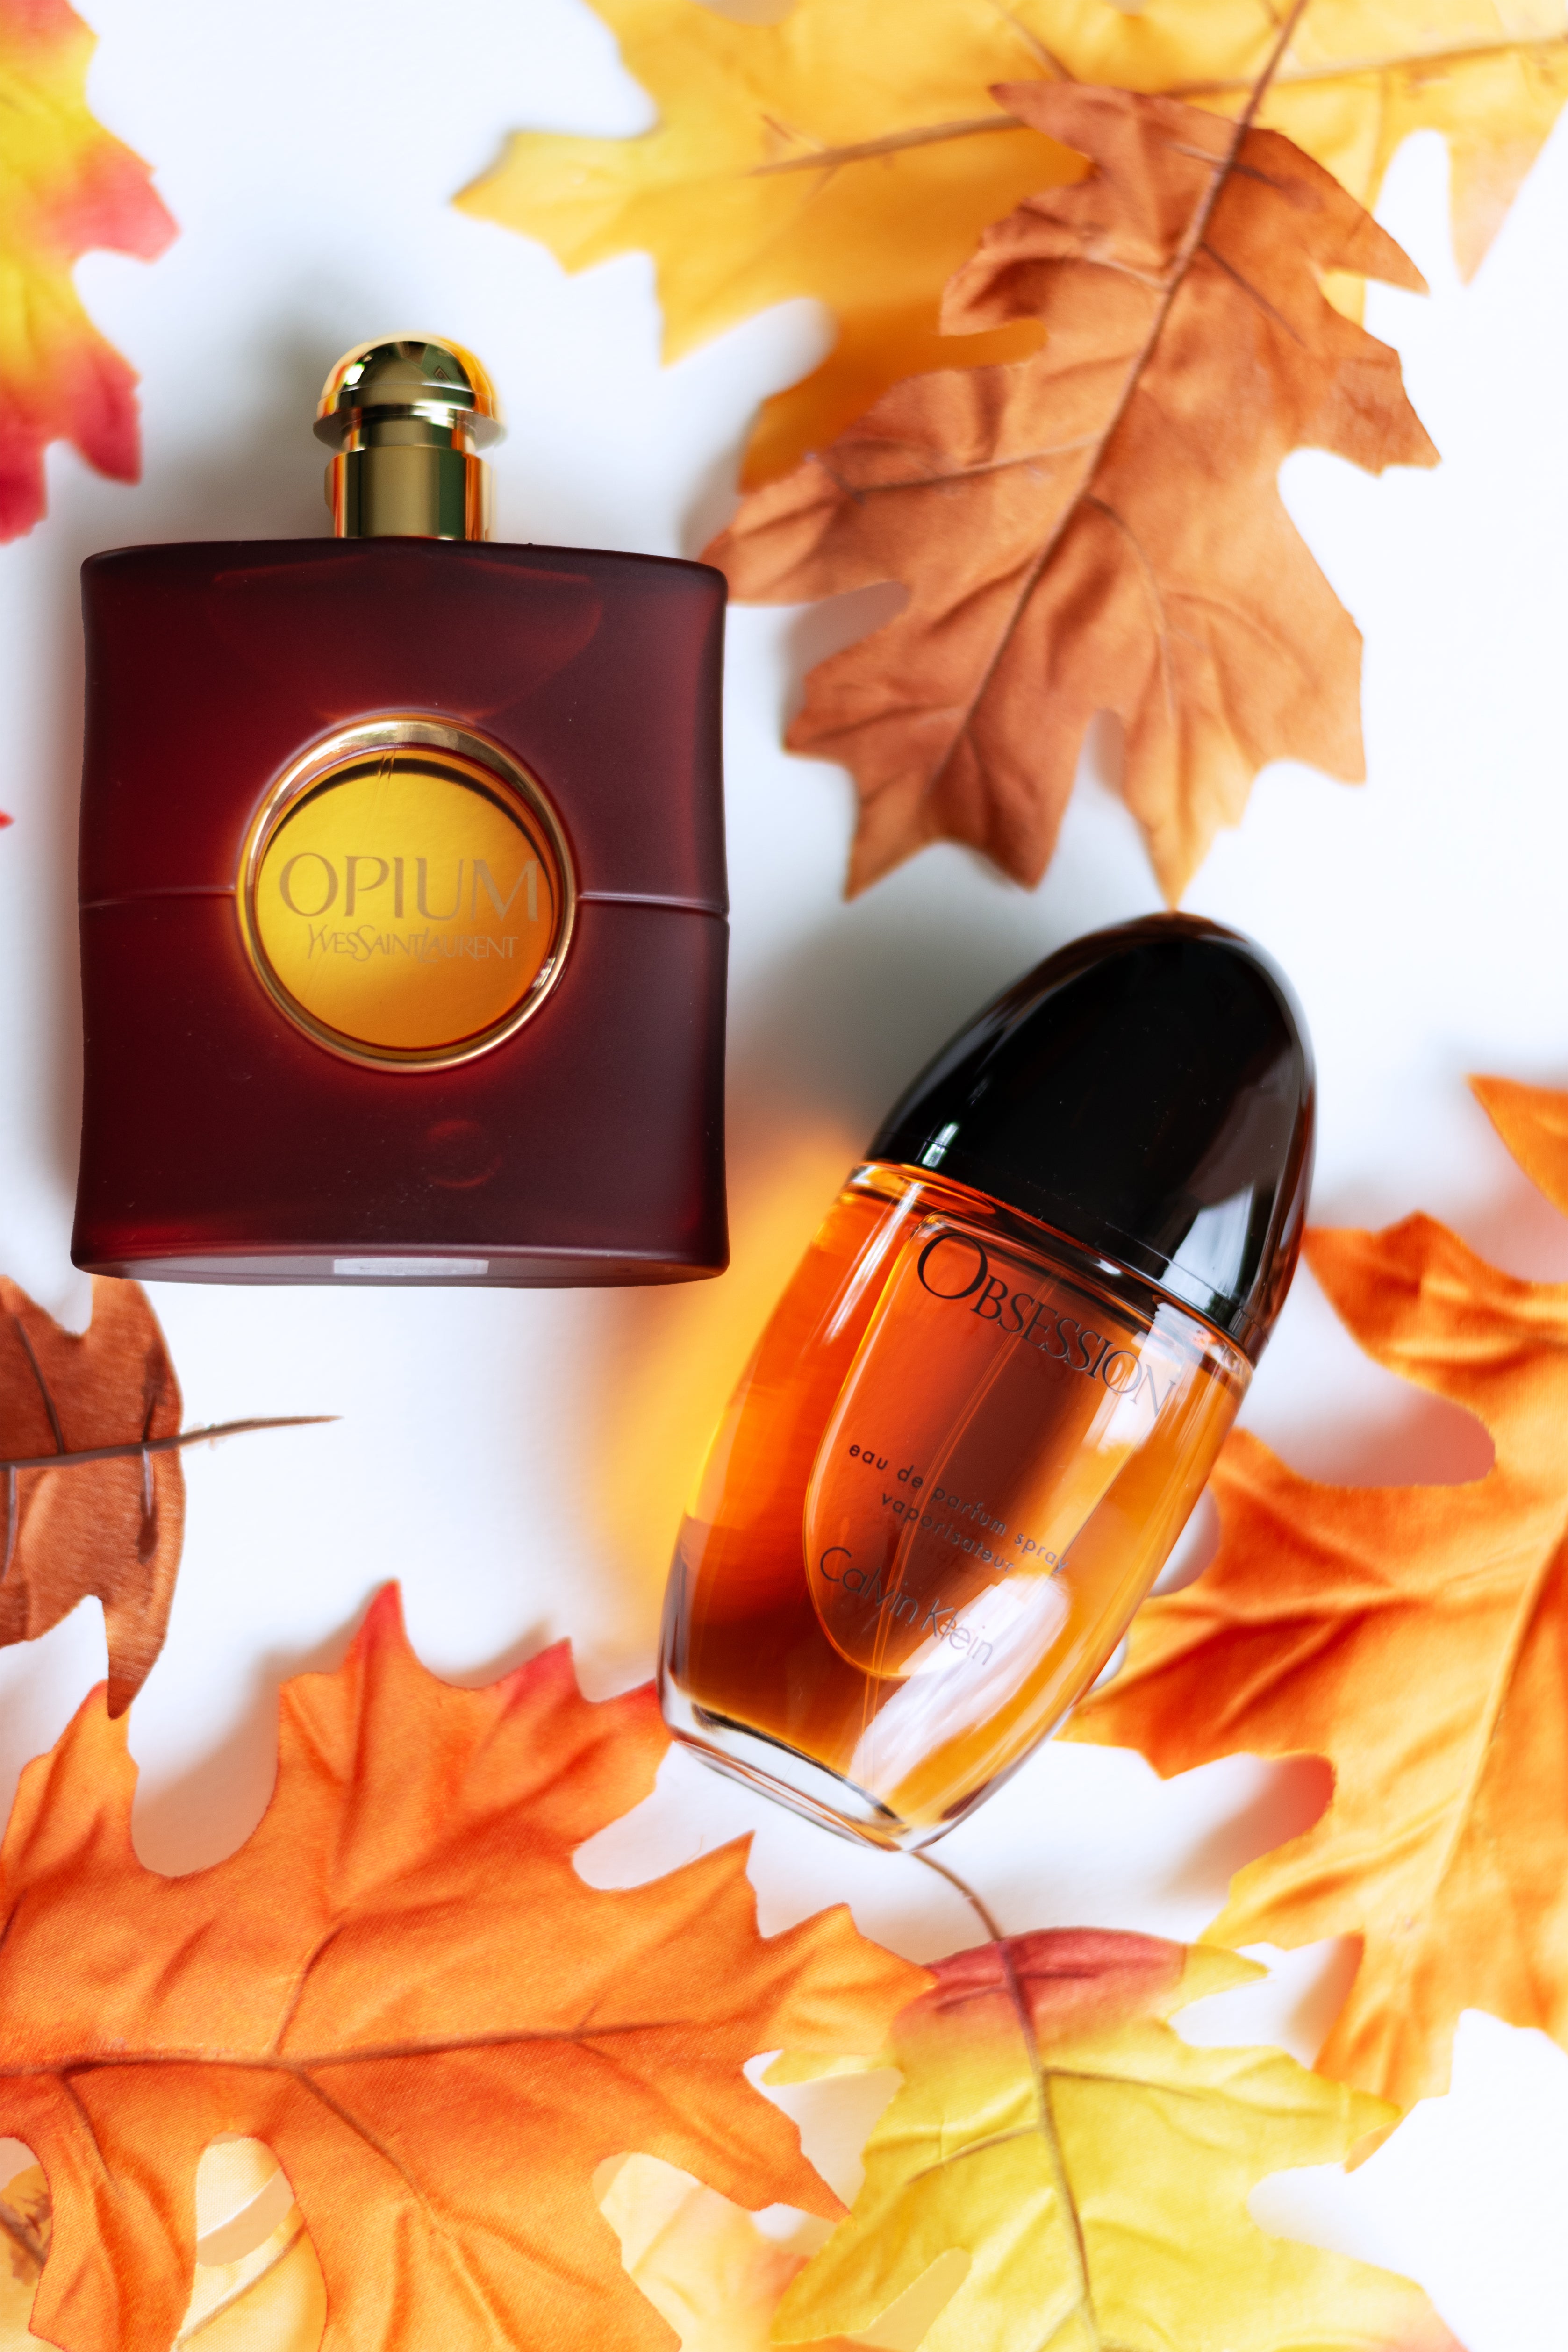 Top 5 Best Fall Fragrances for Her and Him